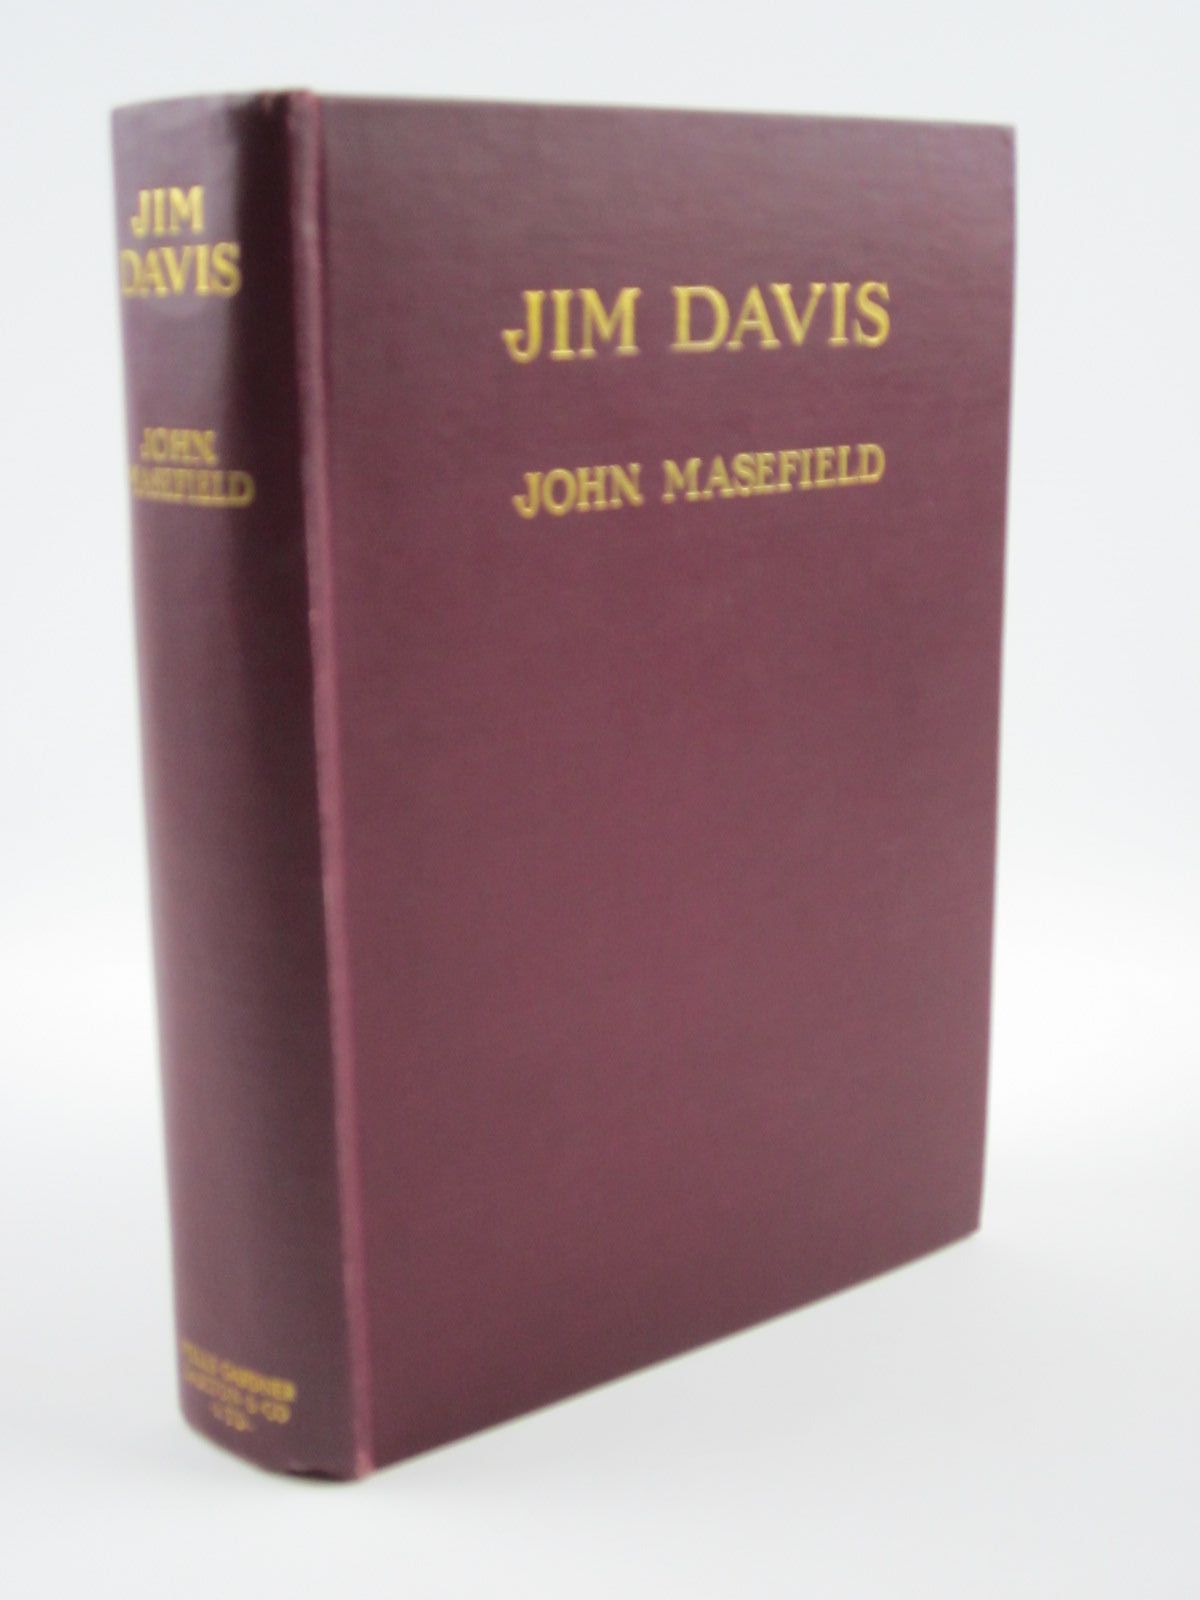 Photo of JIM DAVIS written by Masefield, John illustrated by Schaeffer, Mead published by Wells Gardner, Darton & Co. Limited (STOCK CODE: 1501303)  for sale by Stella & Rose's Books